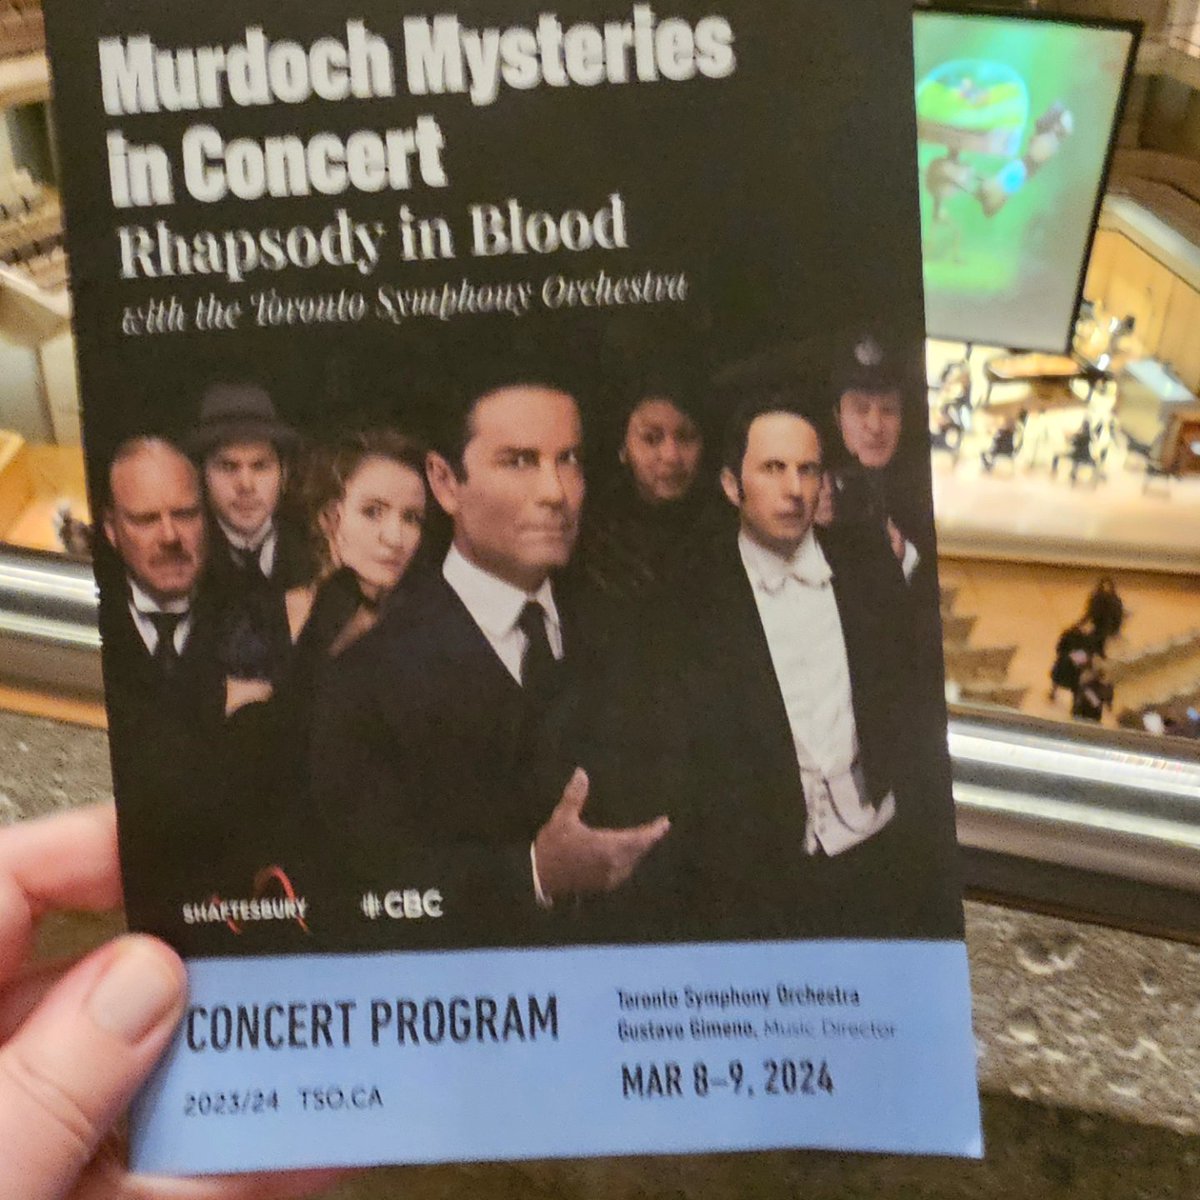 This soundtrack is probably the best yet. It was such a treat to hear it live! Love the notes appearing on screen and the musicians playing in shadow and background @CBCMurdoch #MurdochMysteries